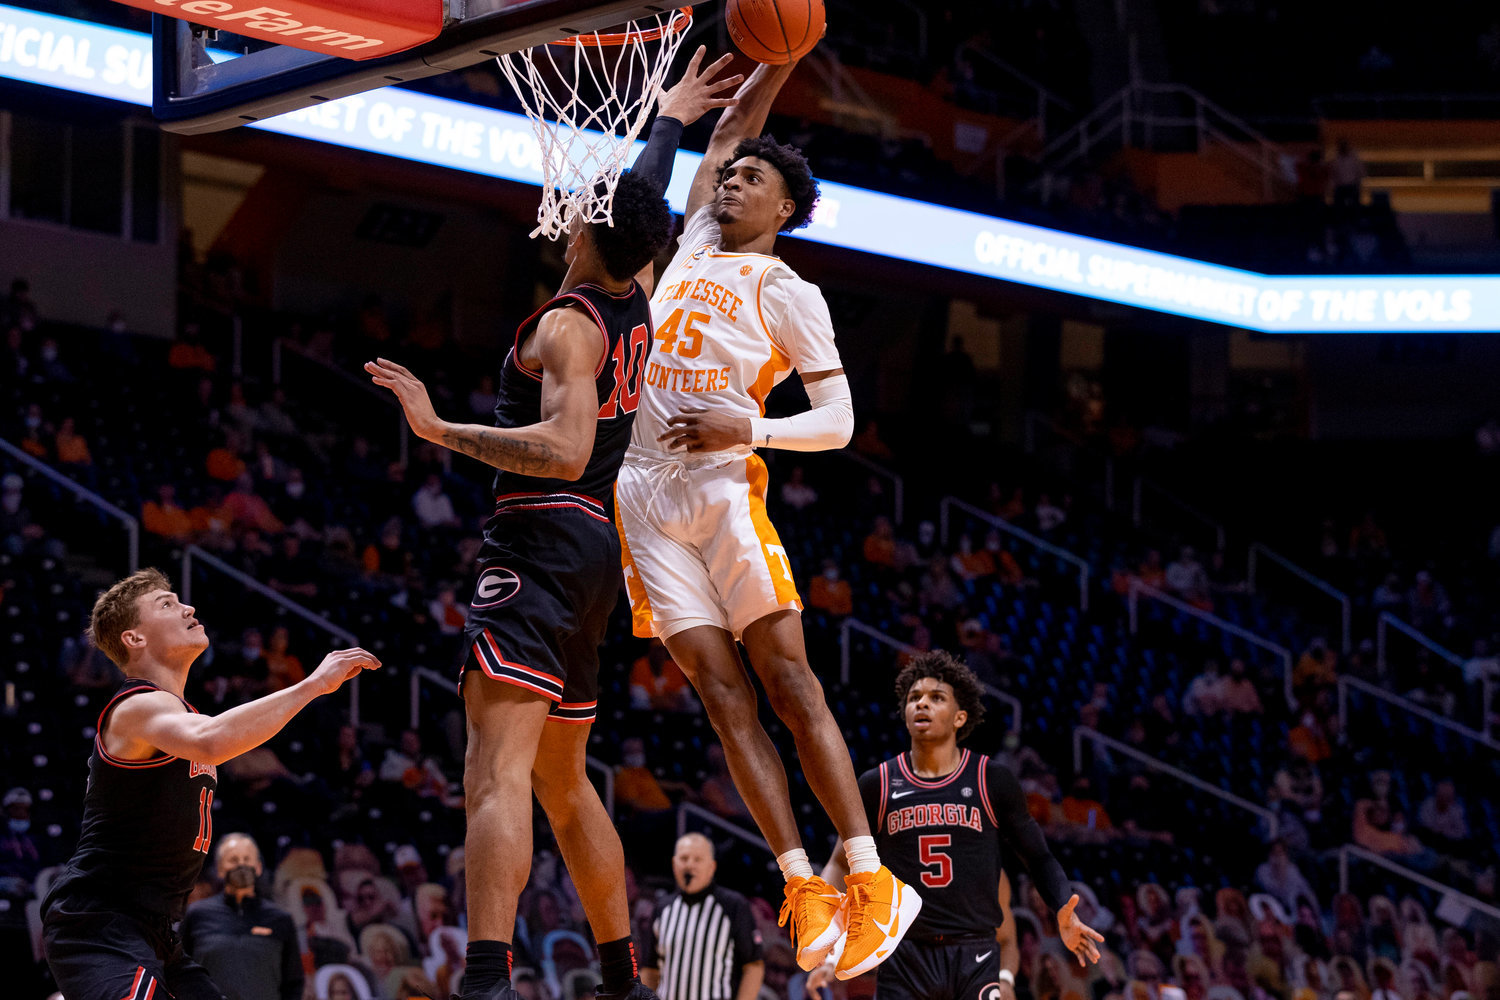 Keon Johnson departed the University of Tennessee after his freshman season and was drafted 21st overall in the 2021 NBA Draft.